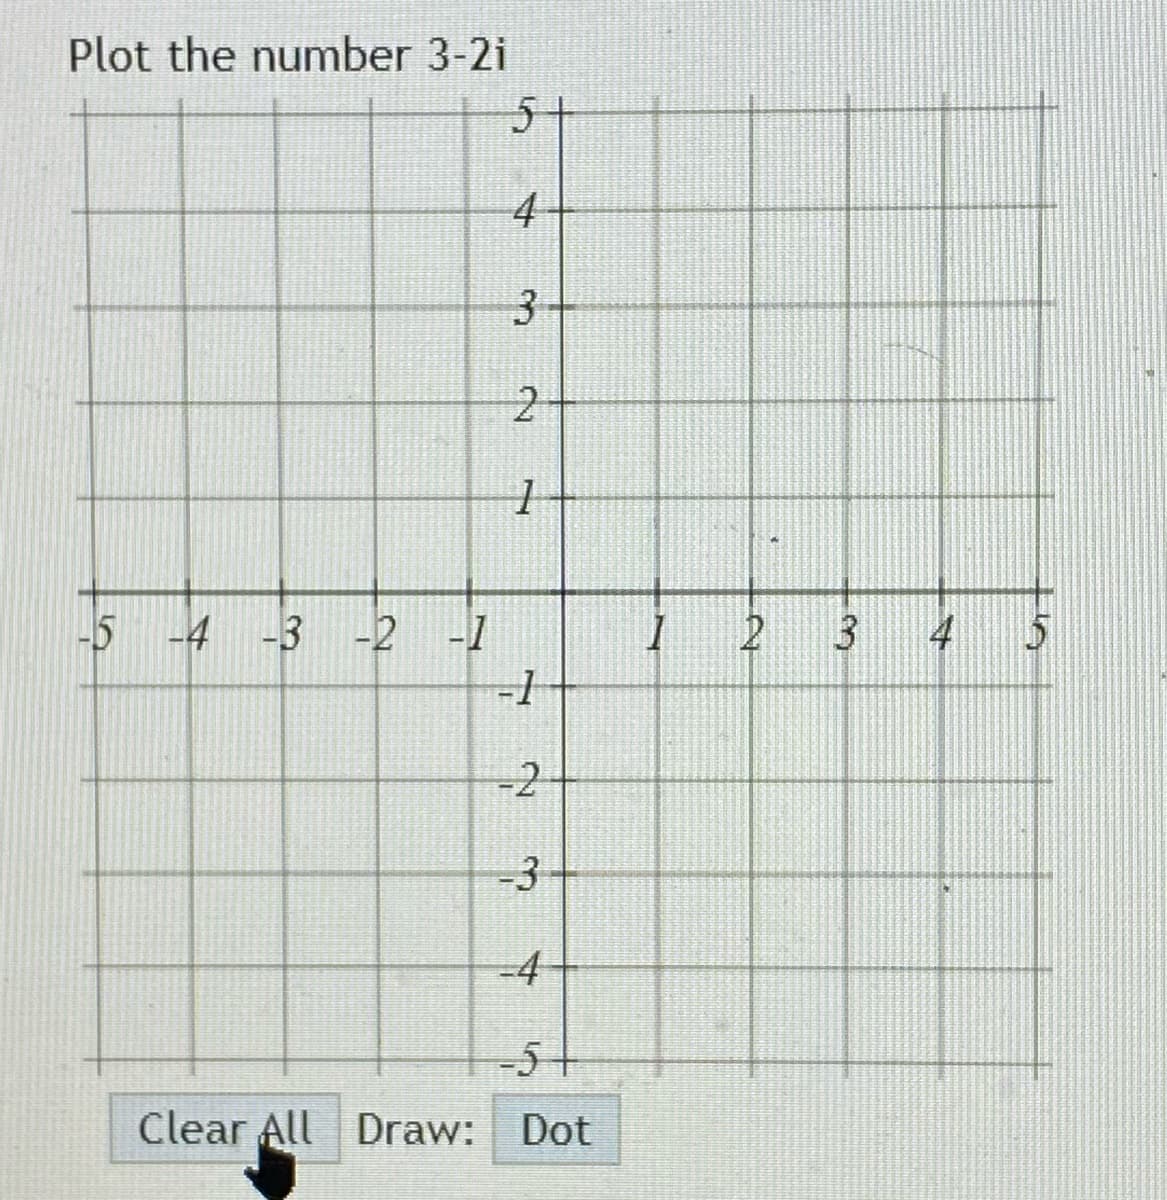 Plot the number 3-2i
5+
4
3.
5 -4 -3 -2 -1
2 3
4
-3
-4-
-5+
Clear All Draw: Dot
2.
2.
